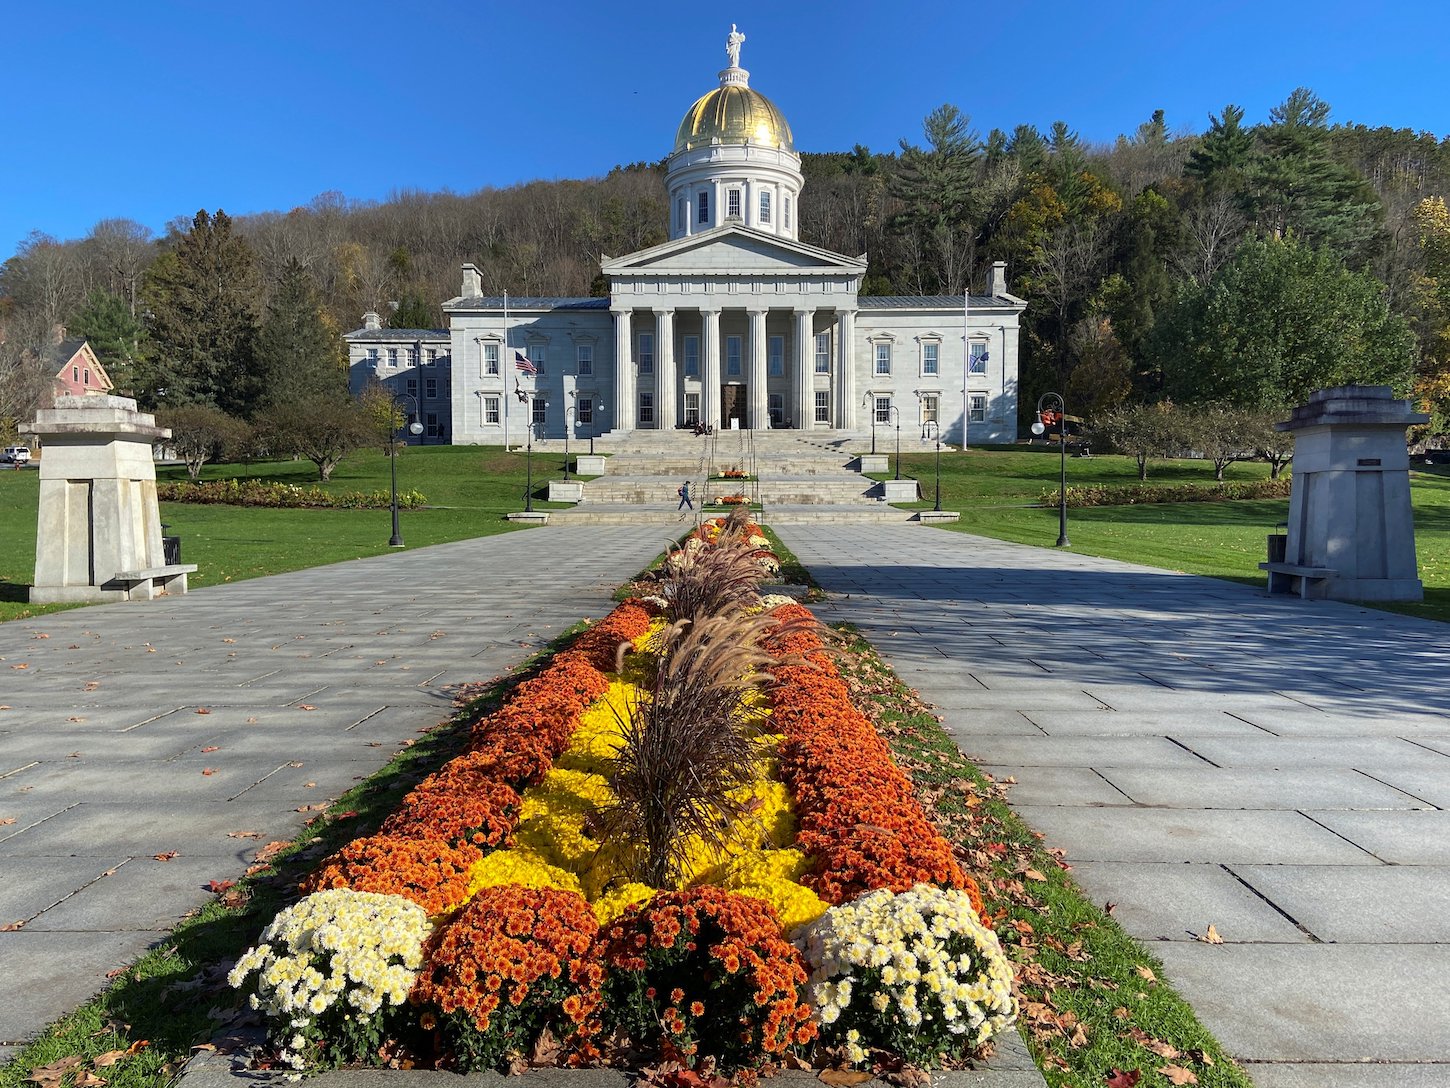 VERMONT STATE CAPITOL